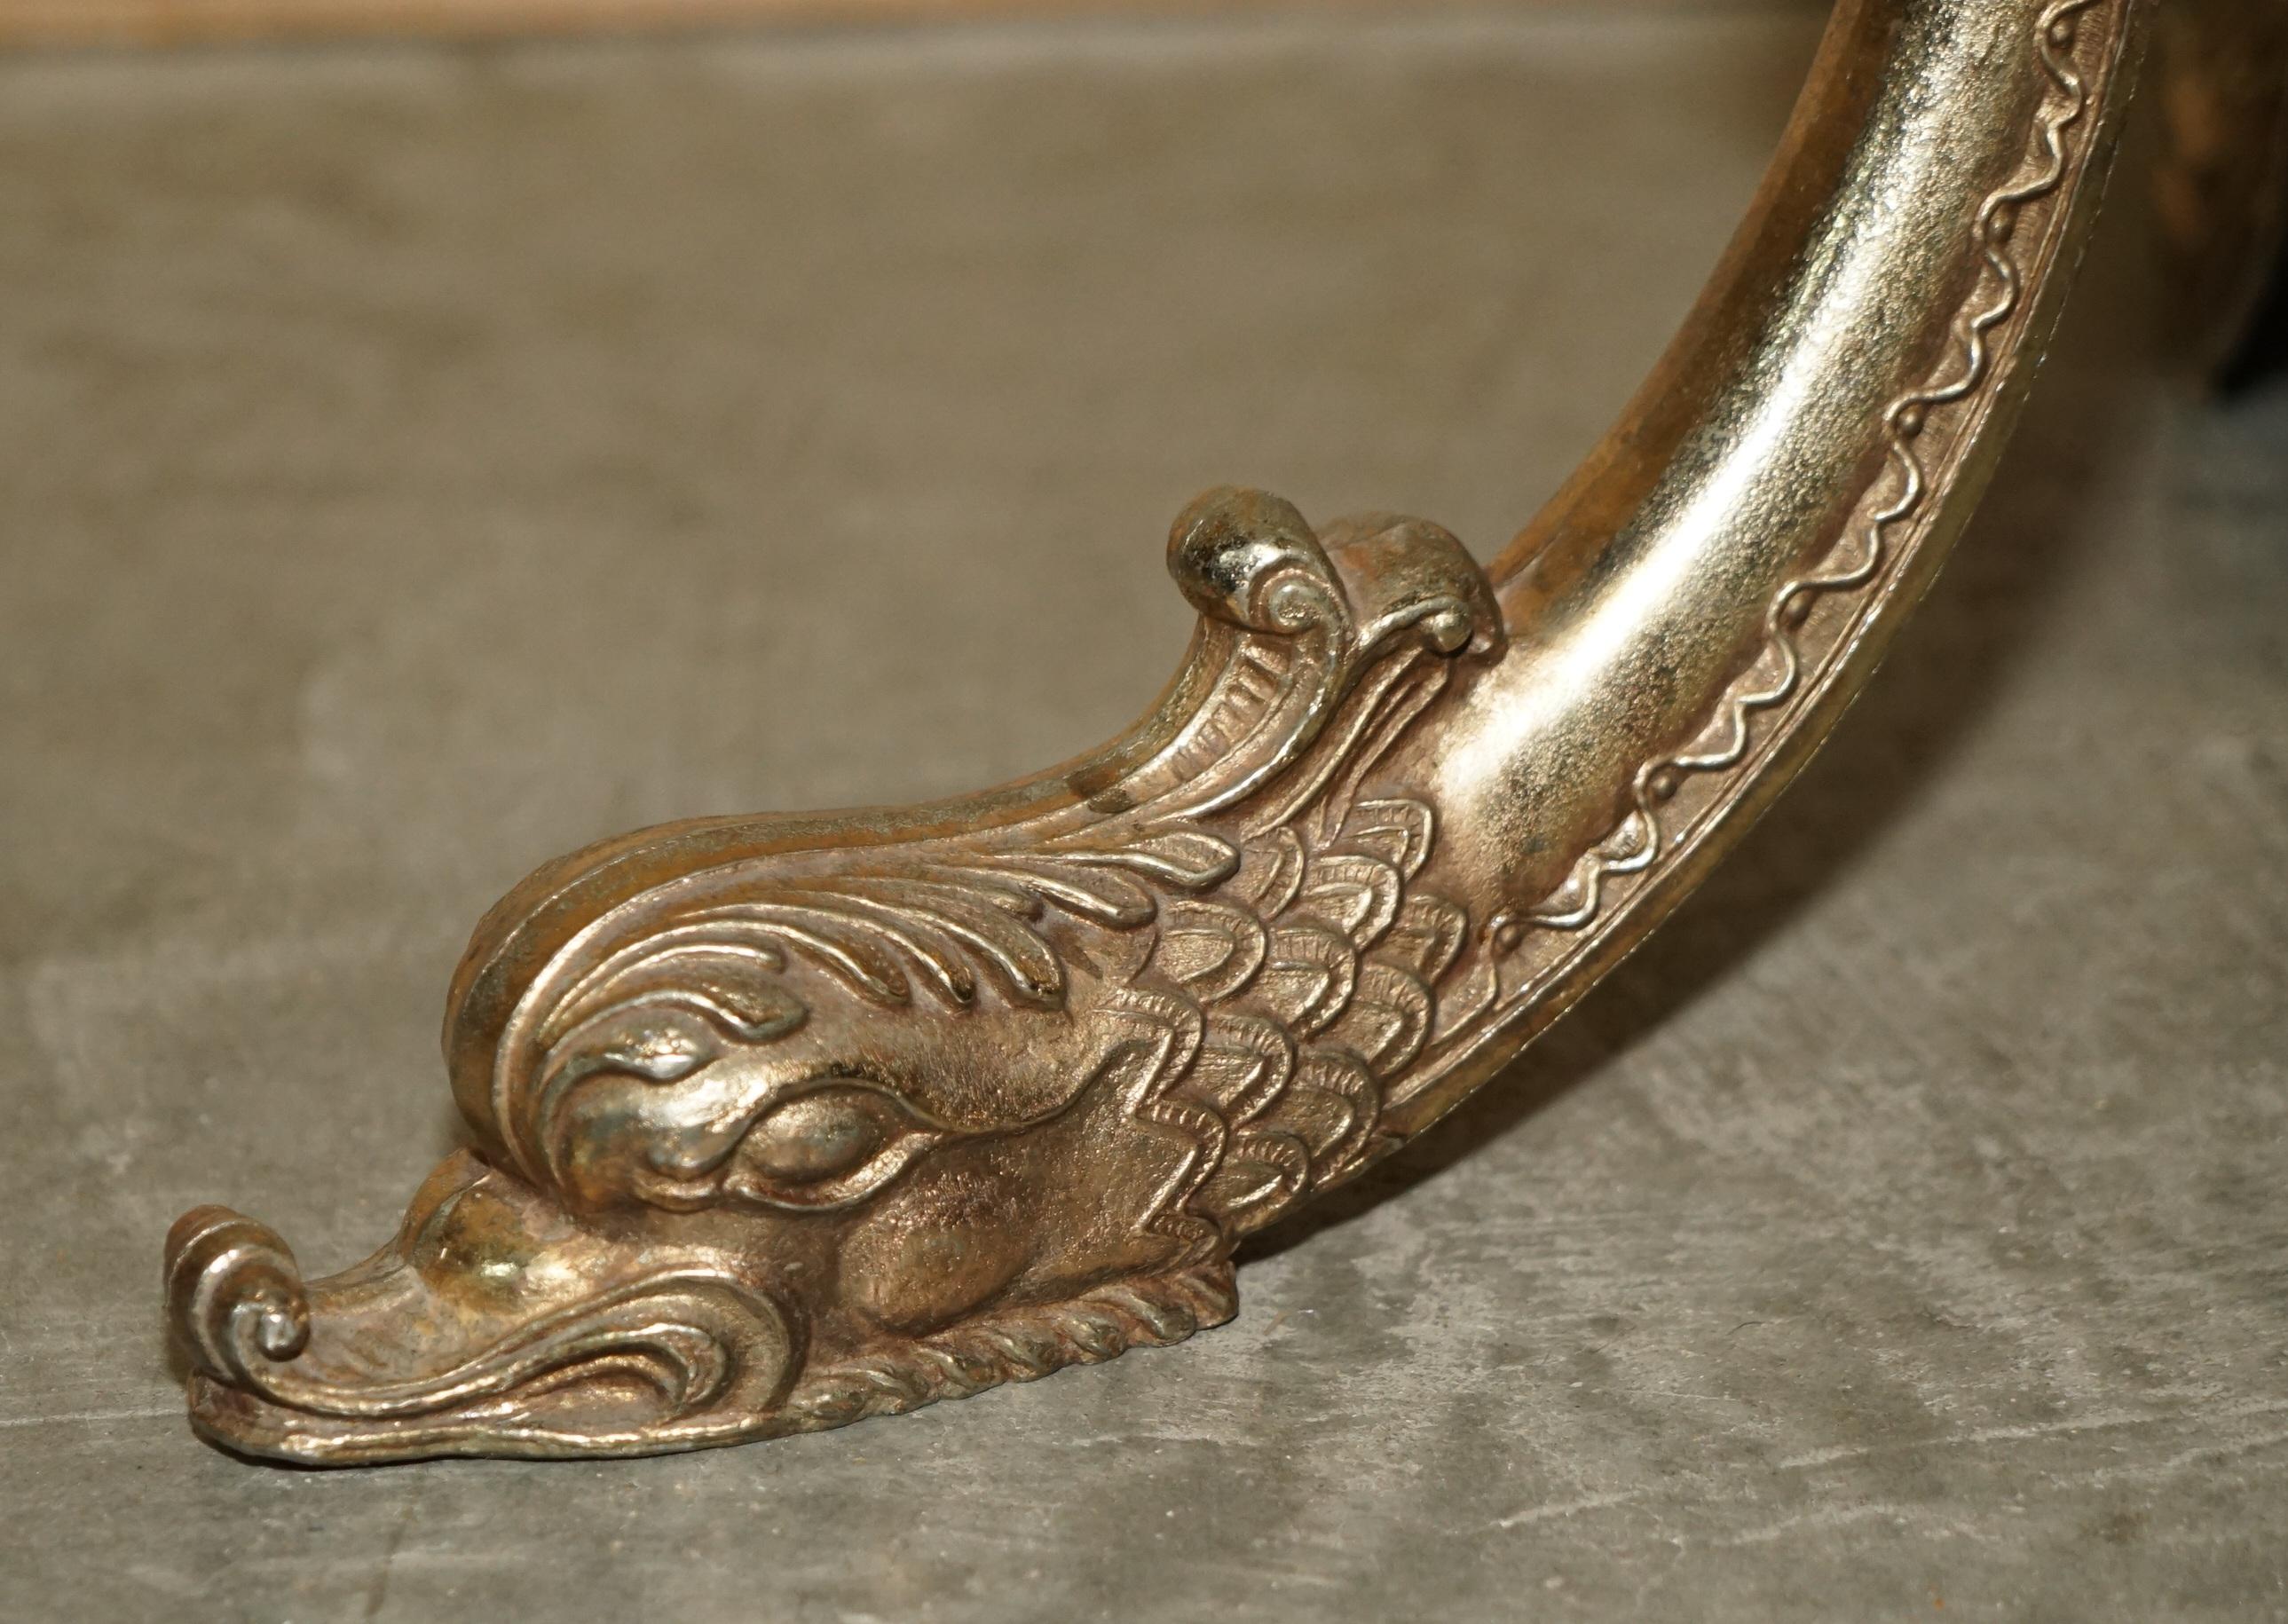 Hand-Crafted ANTIQUE VICTORIAN CiRCA 1900 BRASS COAT HAT & SCARF STAND RARE DOLPHIN CAST LEGS